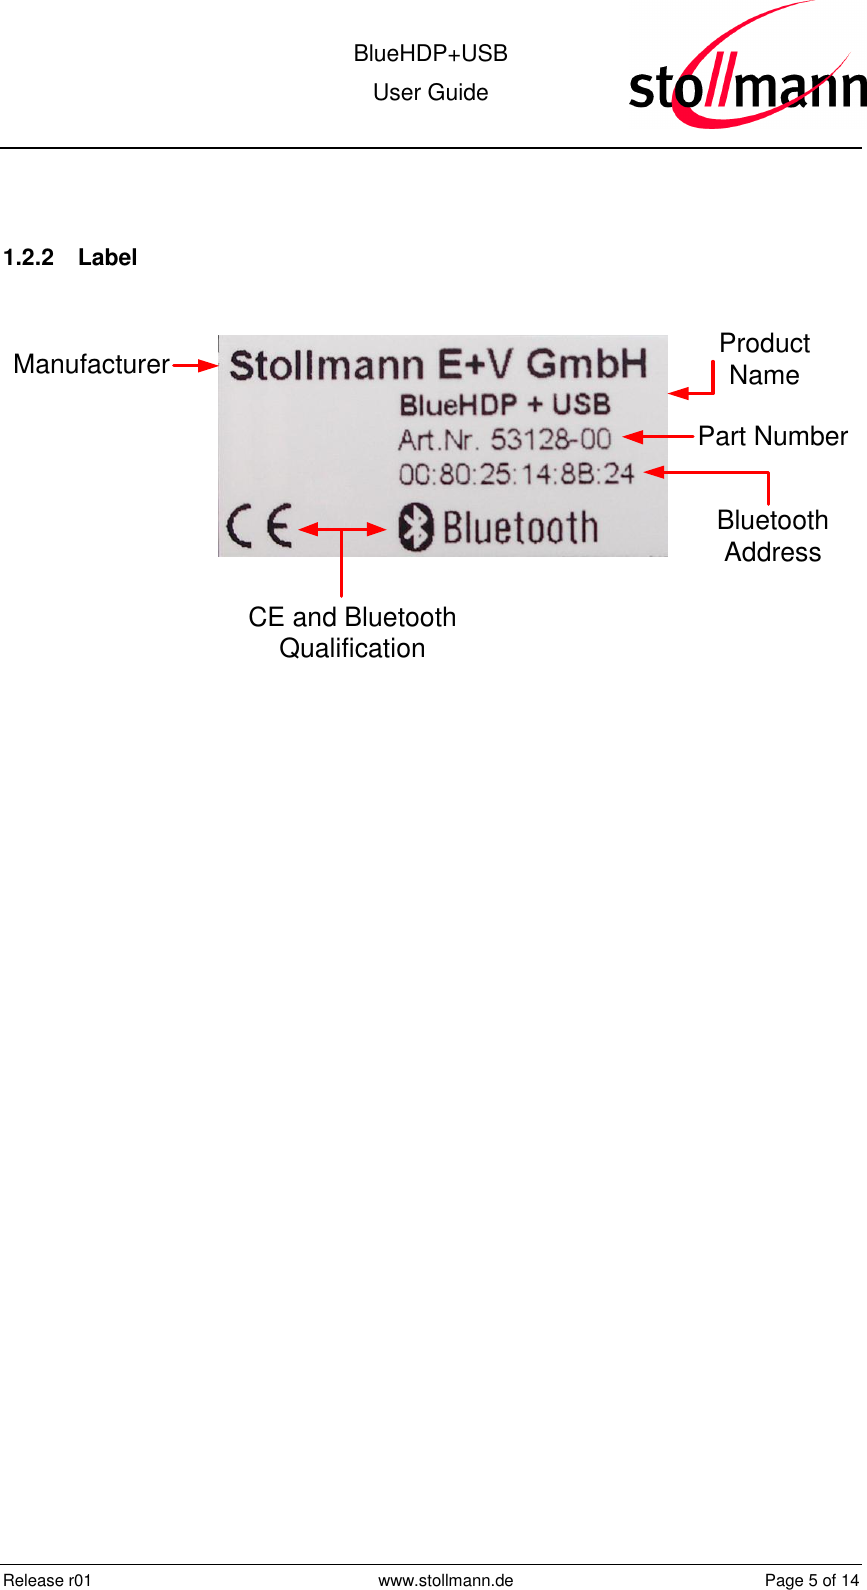  BlueHDP+USB User Guide  Release r01  www.stollmann.de  Page 5 of 14   1.2.2  Label  ManufacturerCE and Bluetooth QualificationProduct NamePart NumberBluetooth Address  